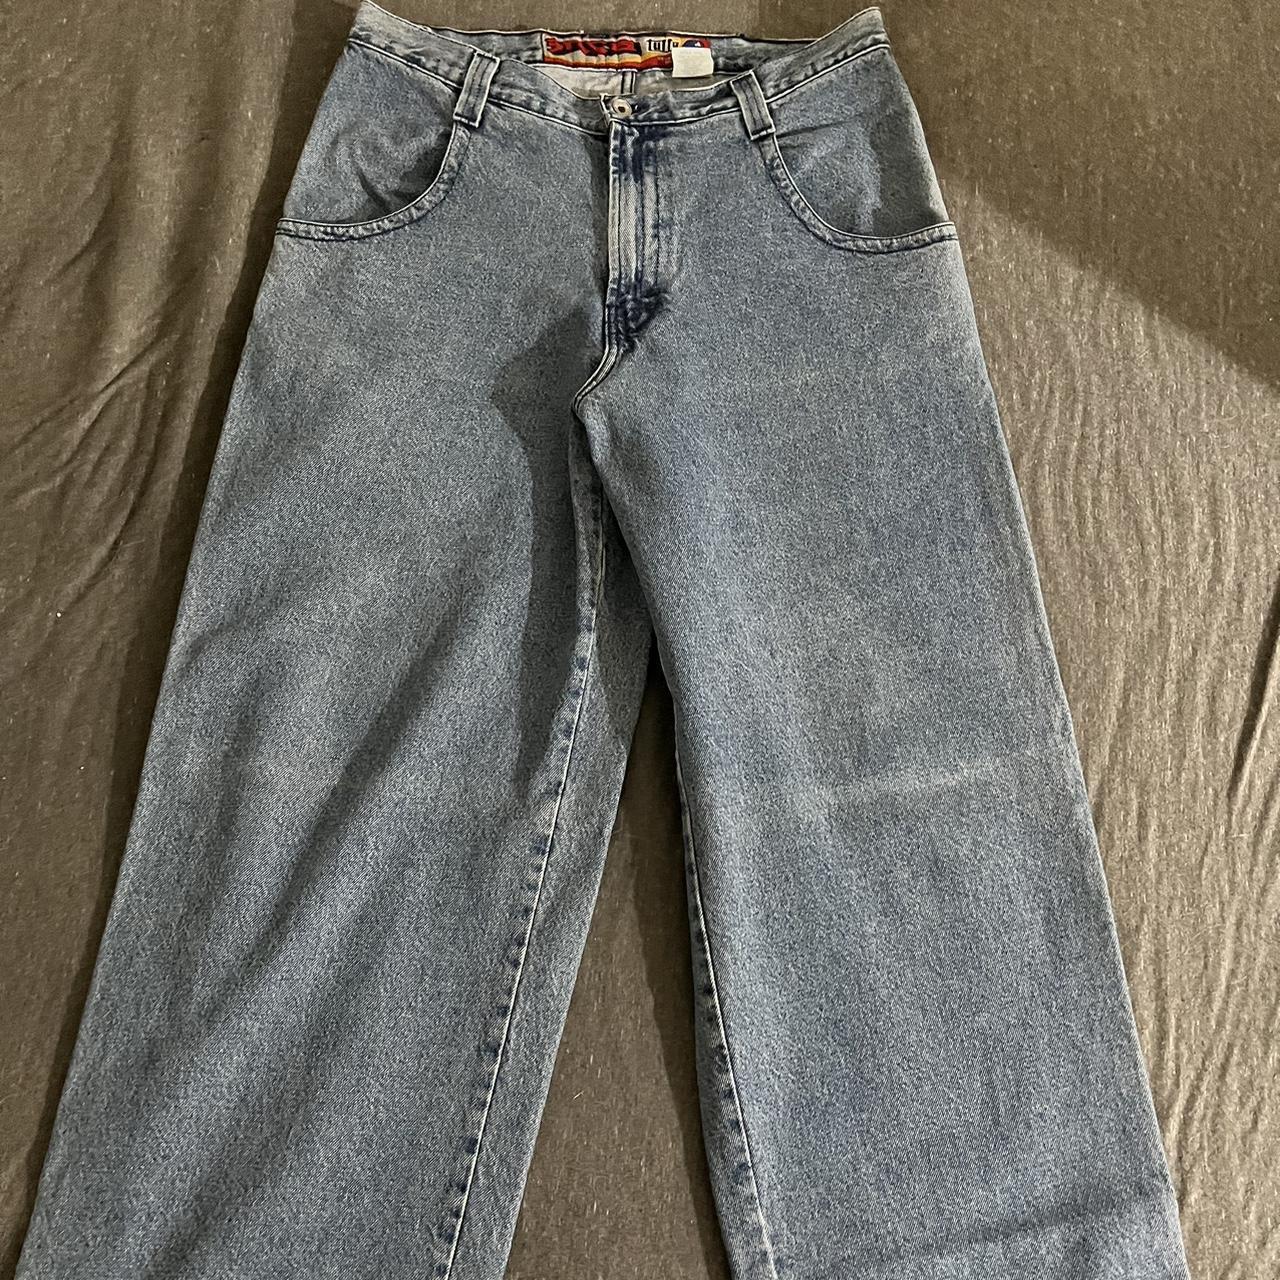 90s JNCO tuffy’s Really rare and sick og pair of... - Depop